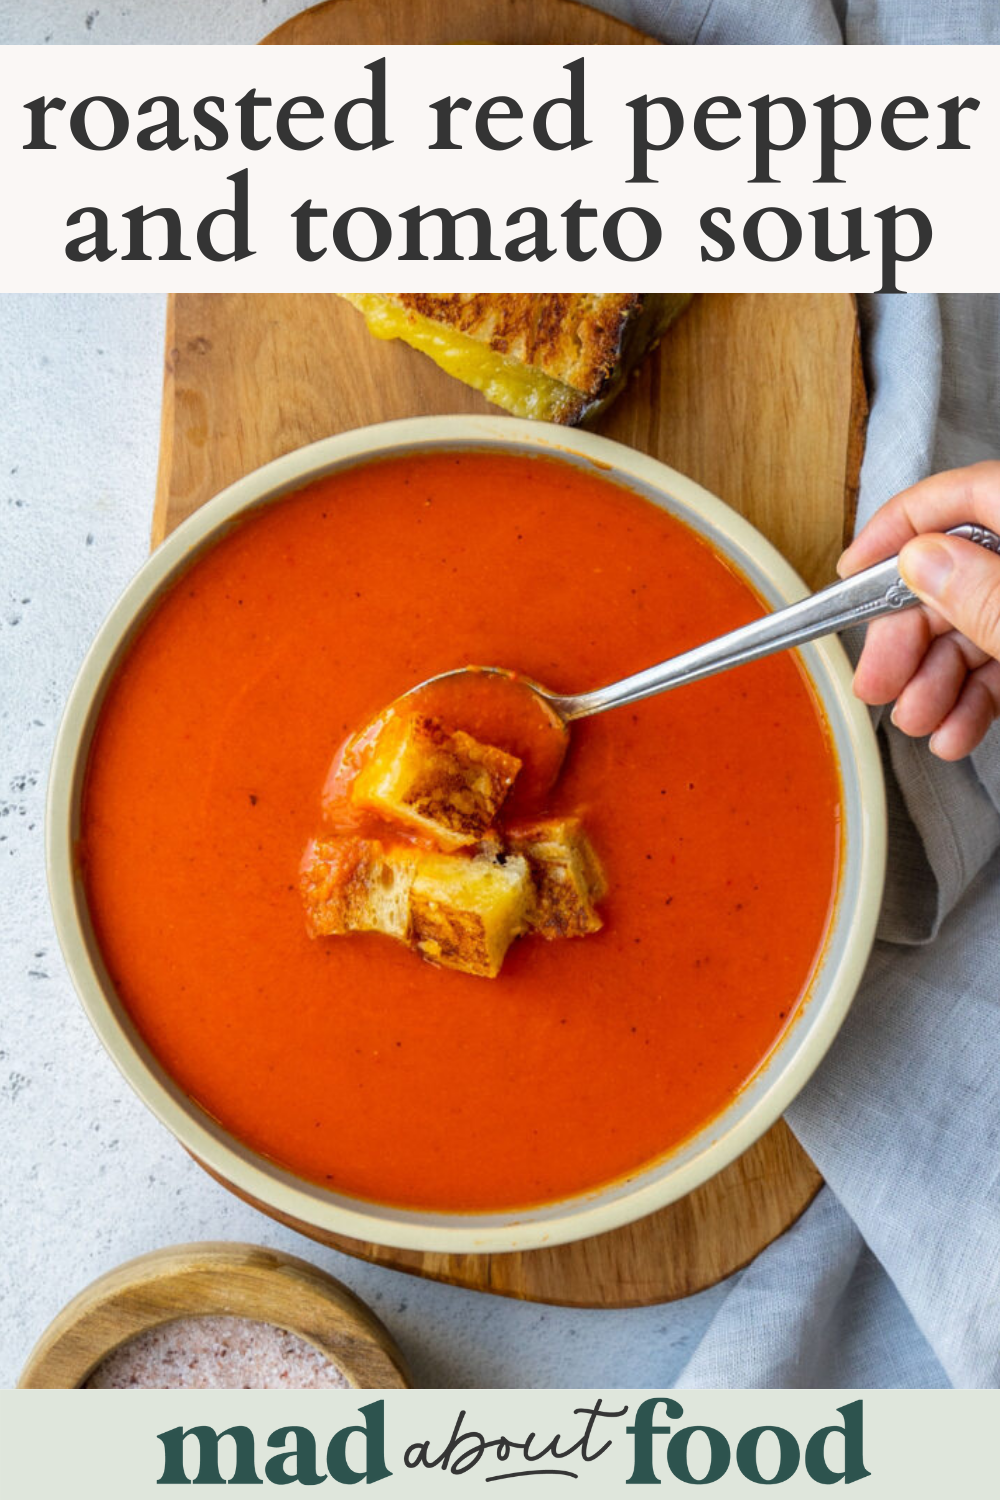 Image for pinning roasted red pepper and tomato soup recipe on Pinterest